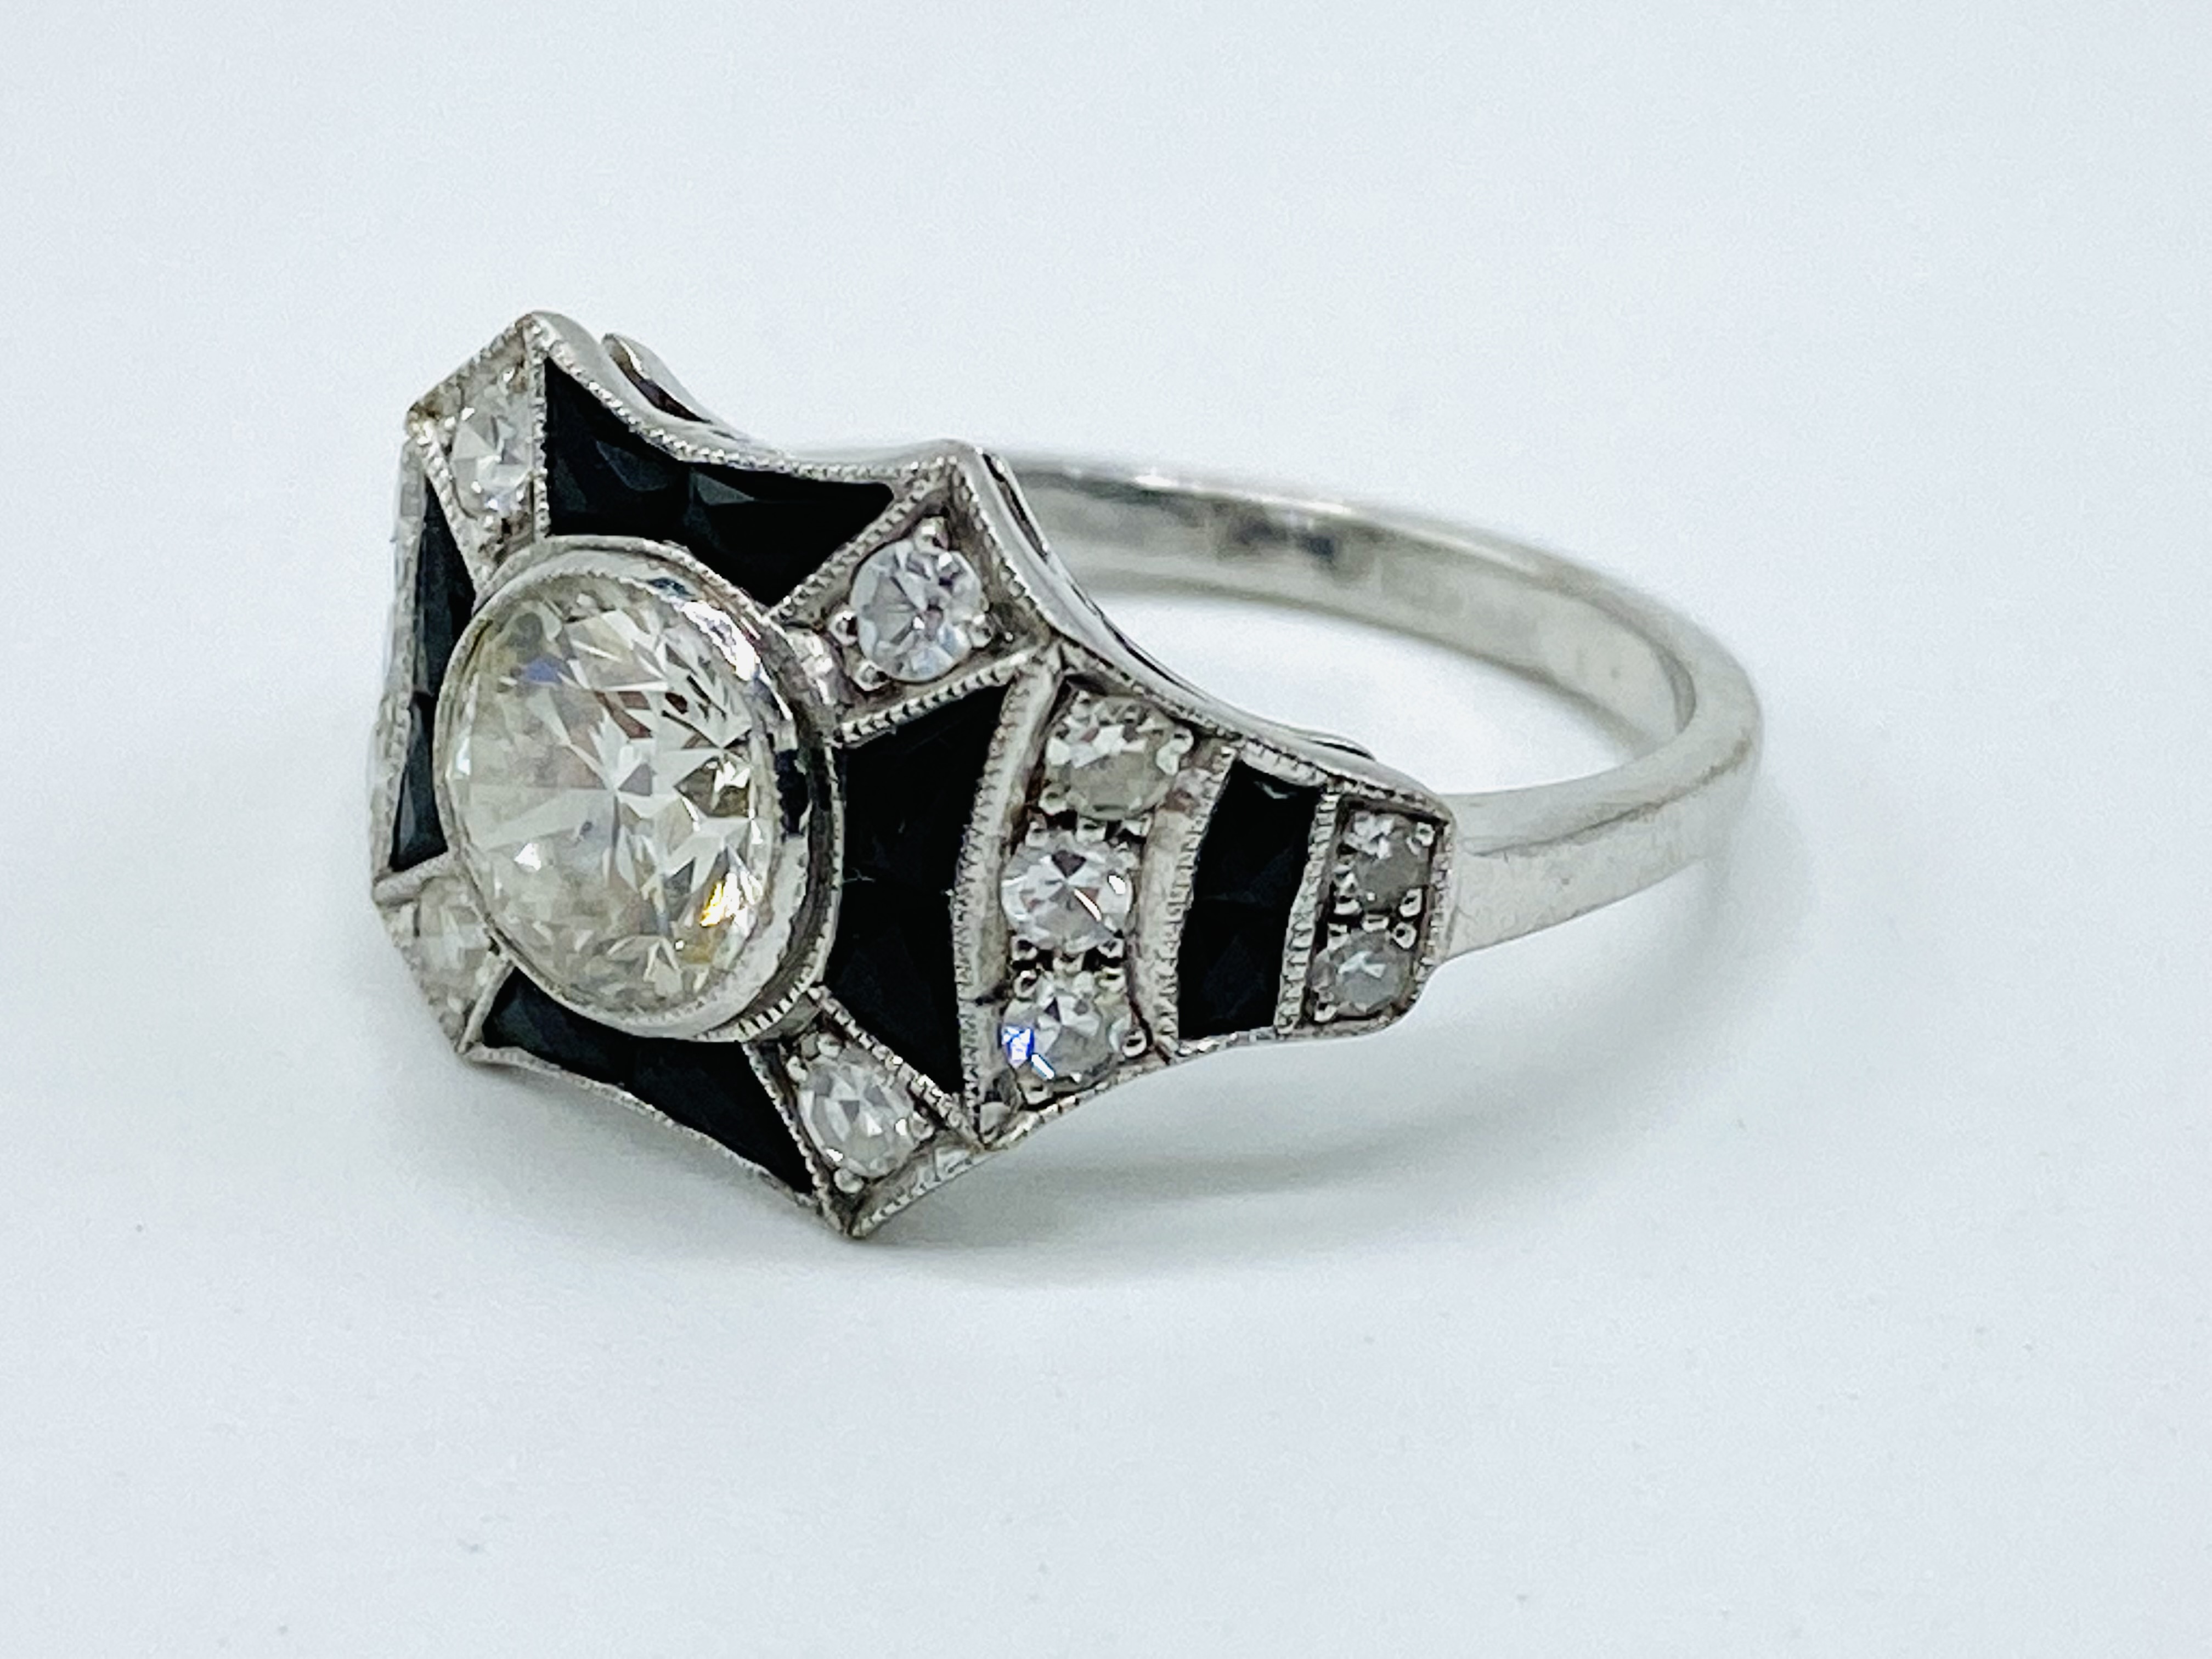 18ct white gold, diamond and black onyx ring - Image 6 of 6